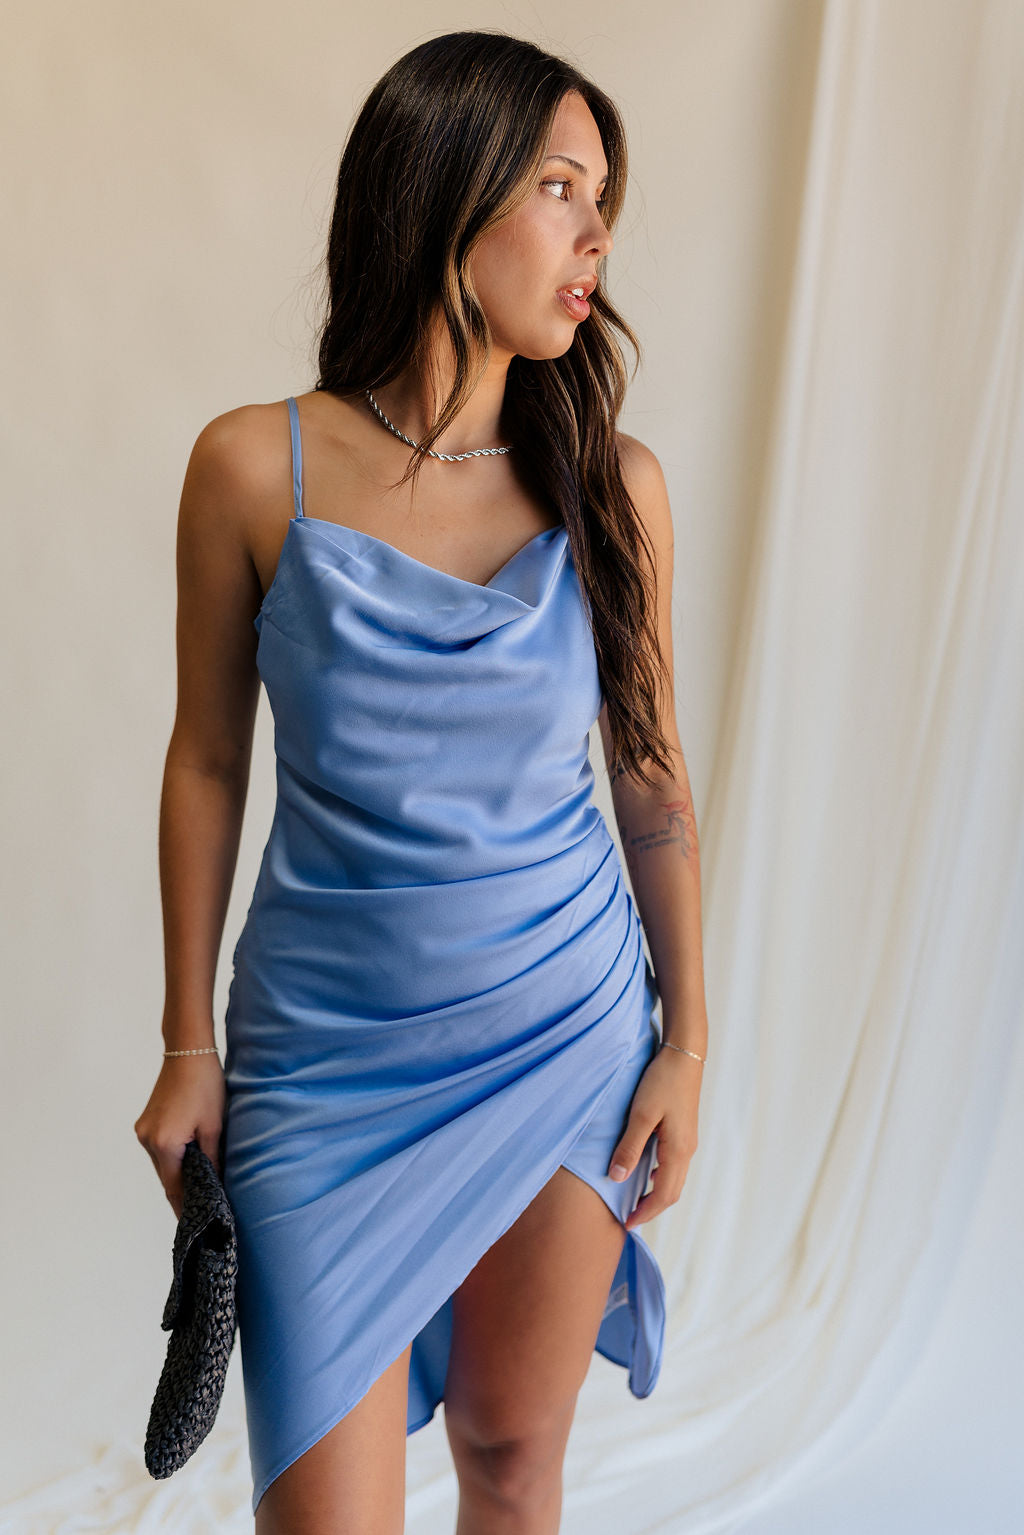 front view of female model wearing the Azlynn Blue Satin Cowl Neckline Dress which features Blue Satin Fabric, Overlay Hem Detail, Ruched Detail, Cowl Neckline with Adjustable Straps and Side Monochrome Zipper with Hook Closure